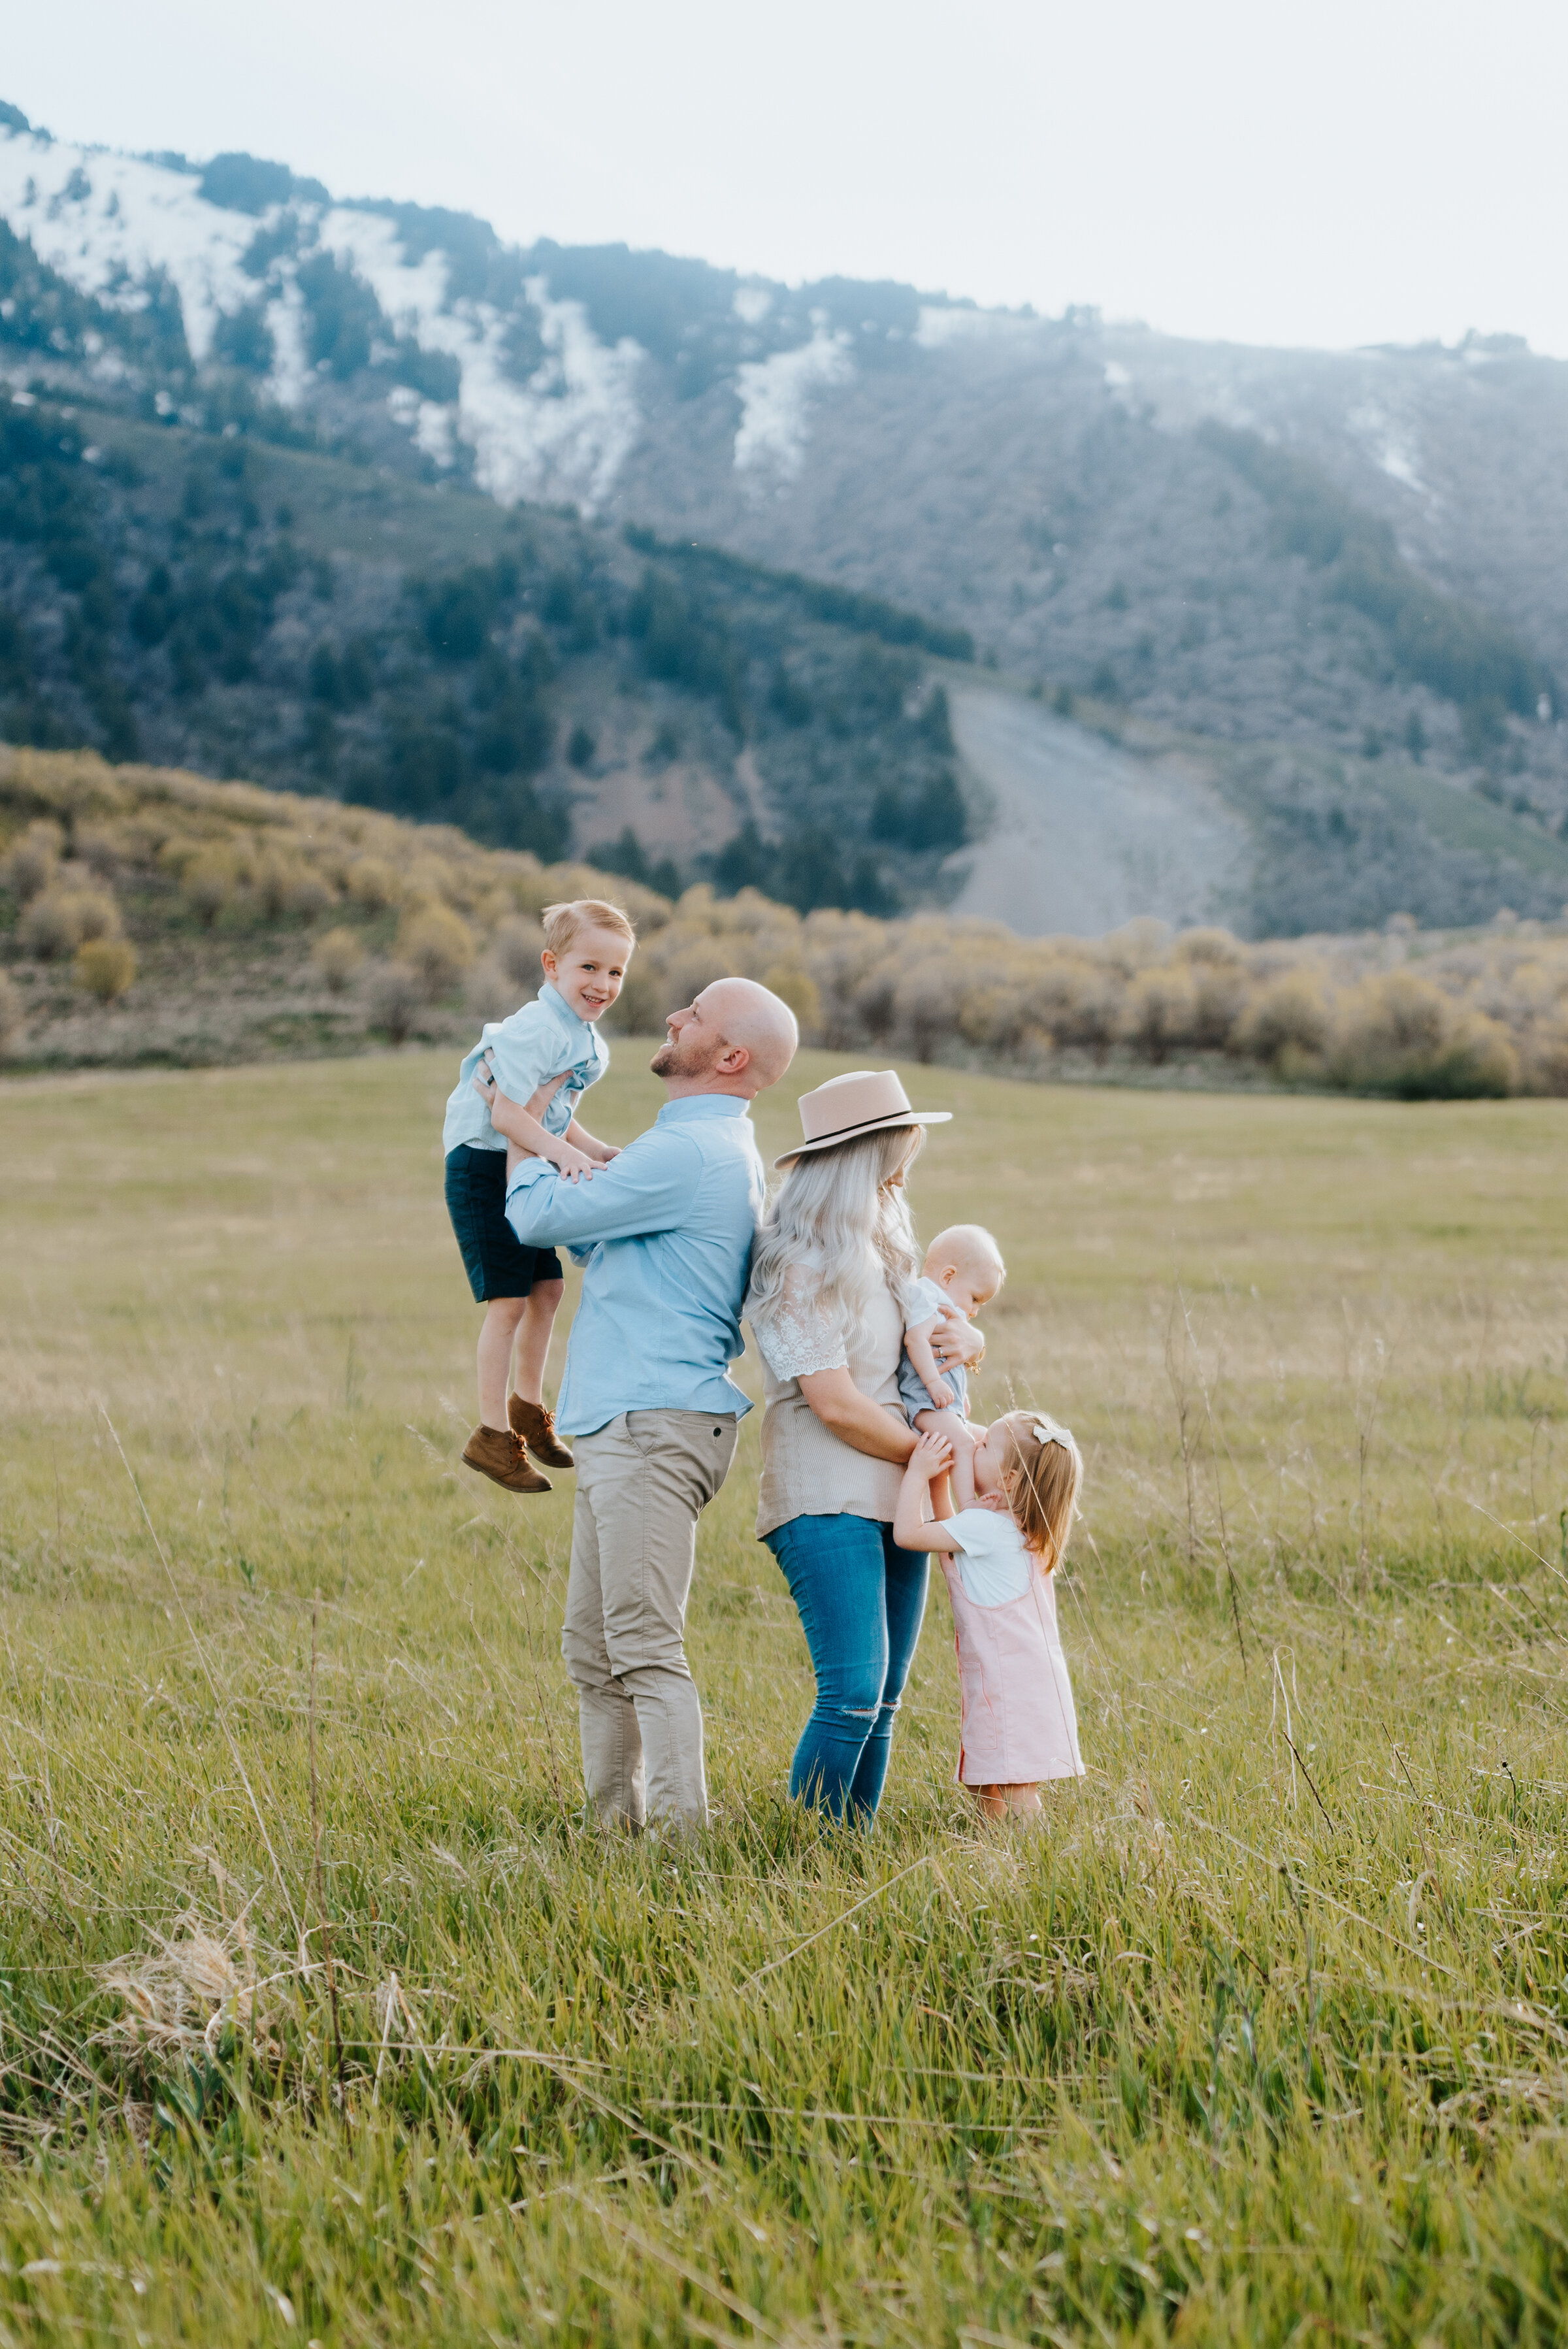  Dad holds son and mom holds daughter in precious family photo taken in the Wellsville Utah mountains. Family pose ideas for three children family pose ideas for mountain photoshoot logan utah photographer utah photographer capturing memories mama looking for photos of the fam #dadandson #momanddaughter #mamasgirl #daddysgirl #famphotos #capturememories #childrenphotos #famphotoinspo #mountainfamily 